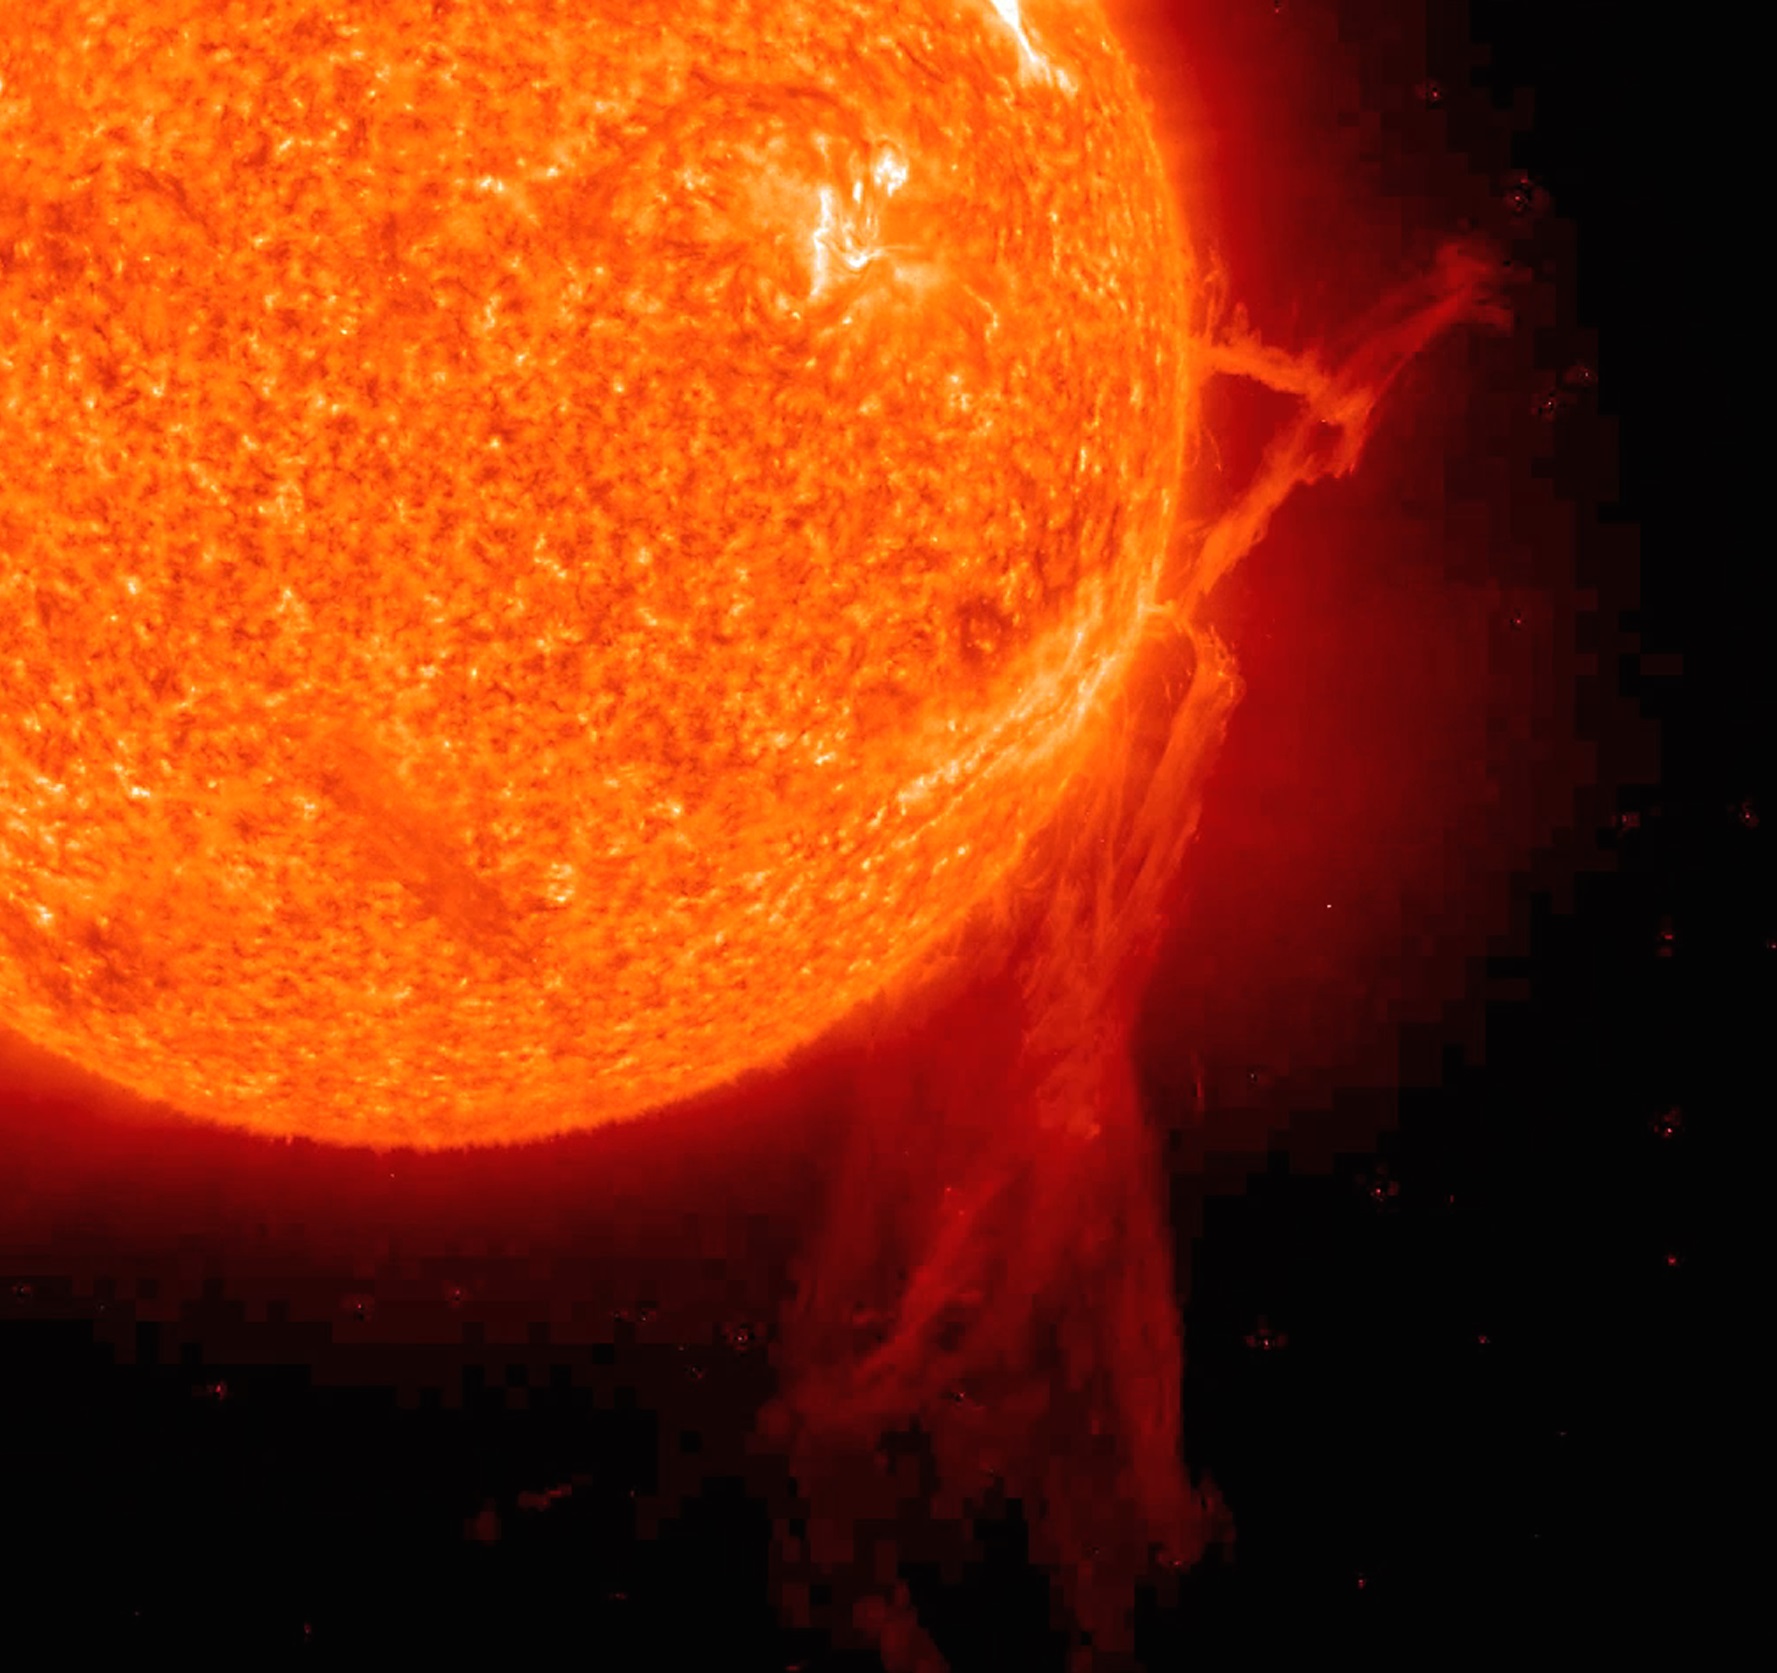 This image, captured in 2010 by NASA's STEREO spacecraft, shows a solar filament almost one million miles long.